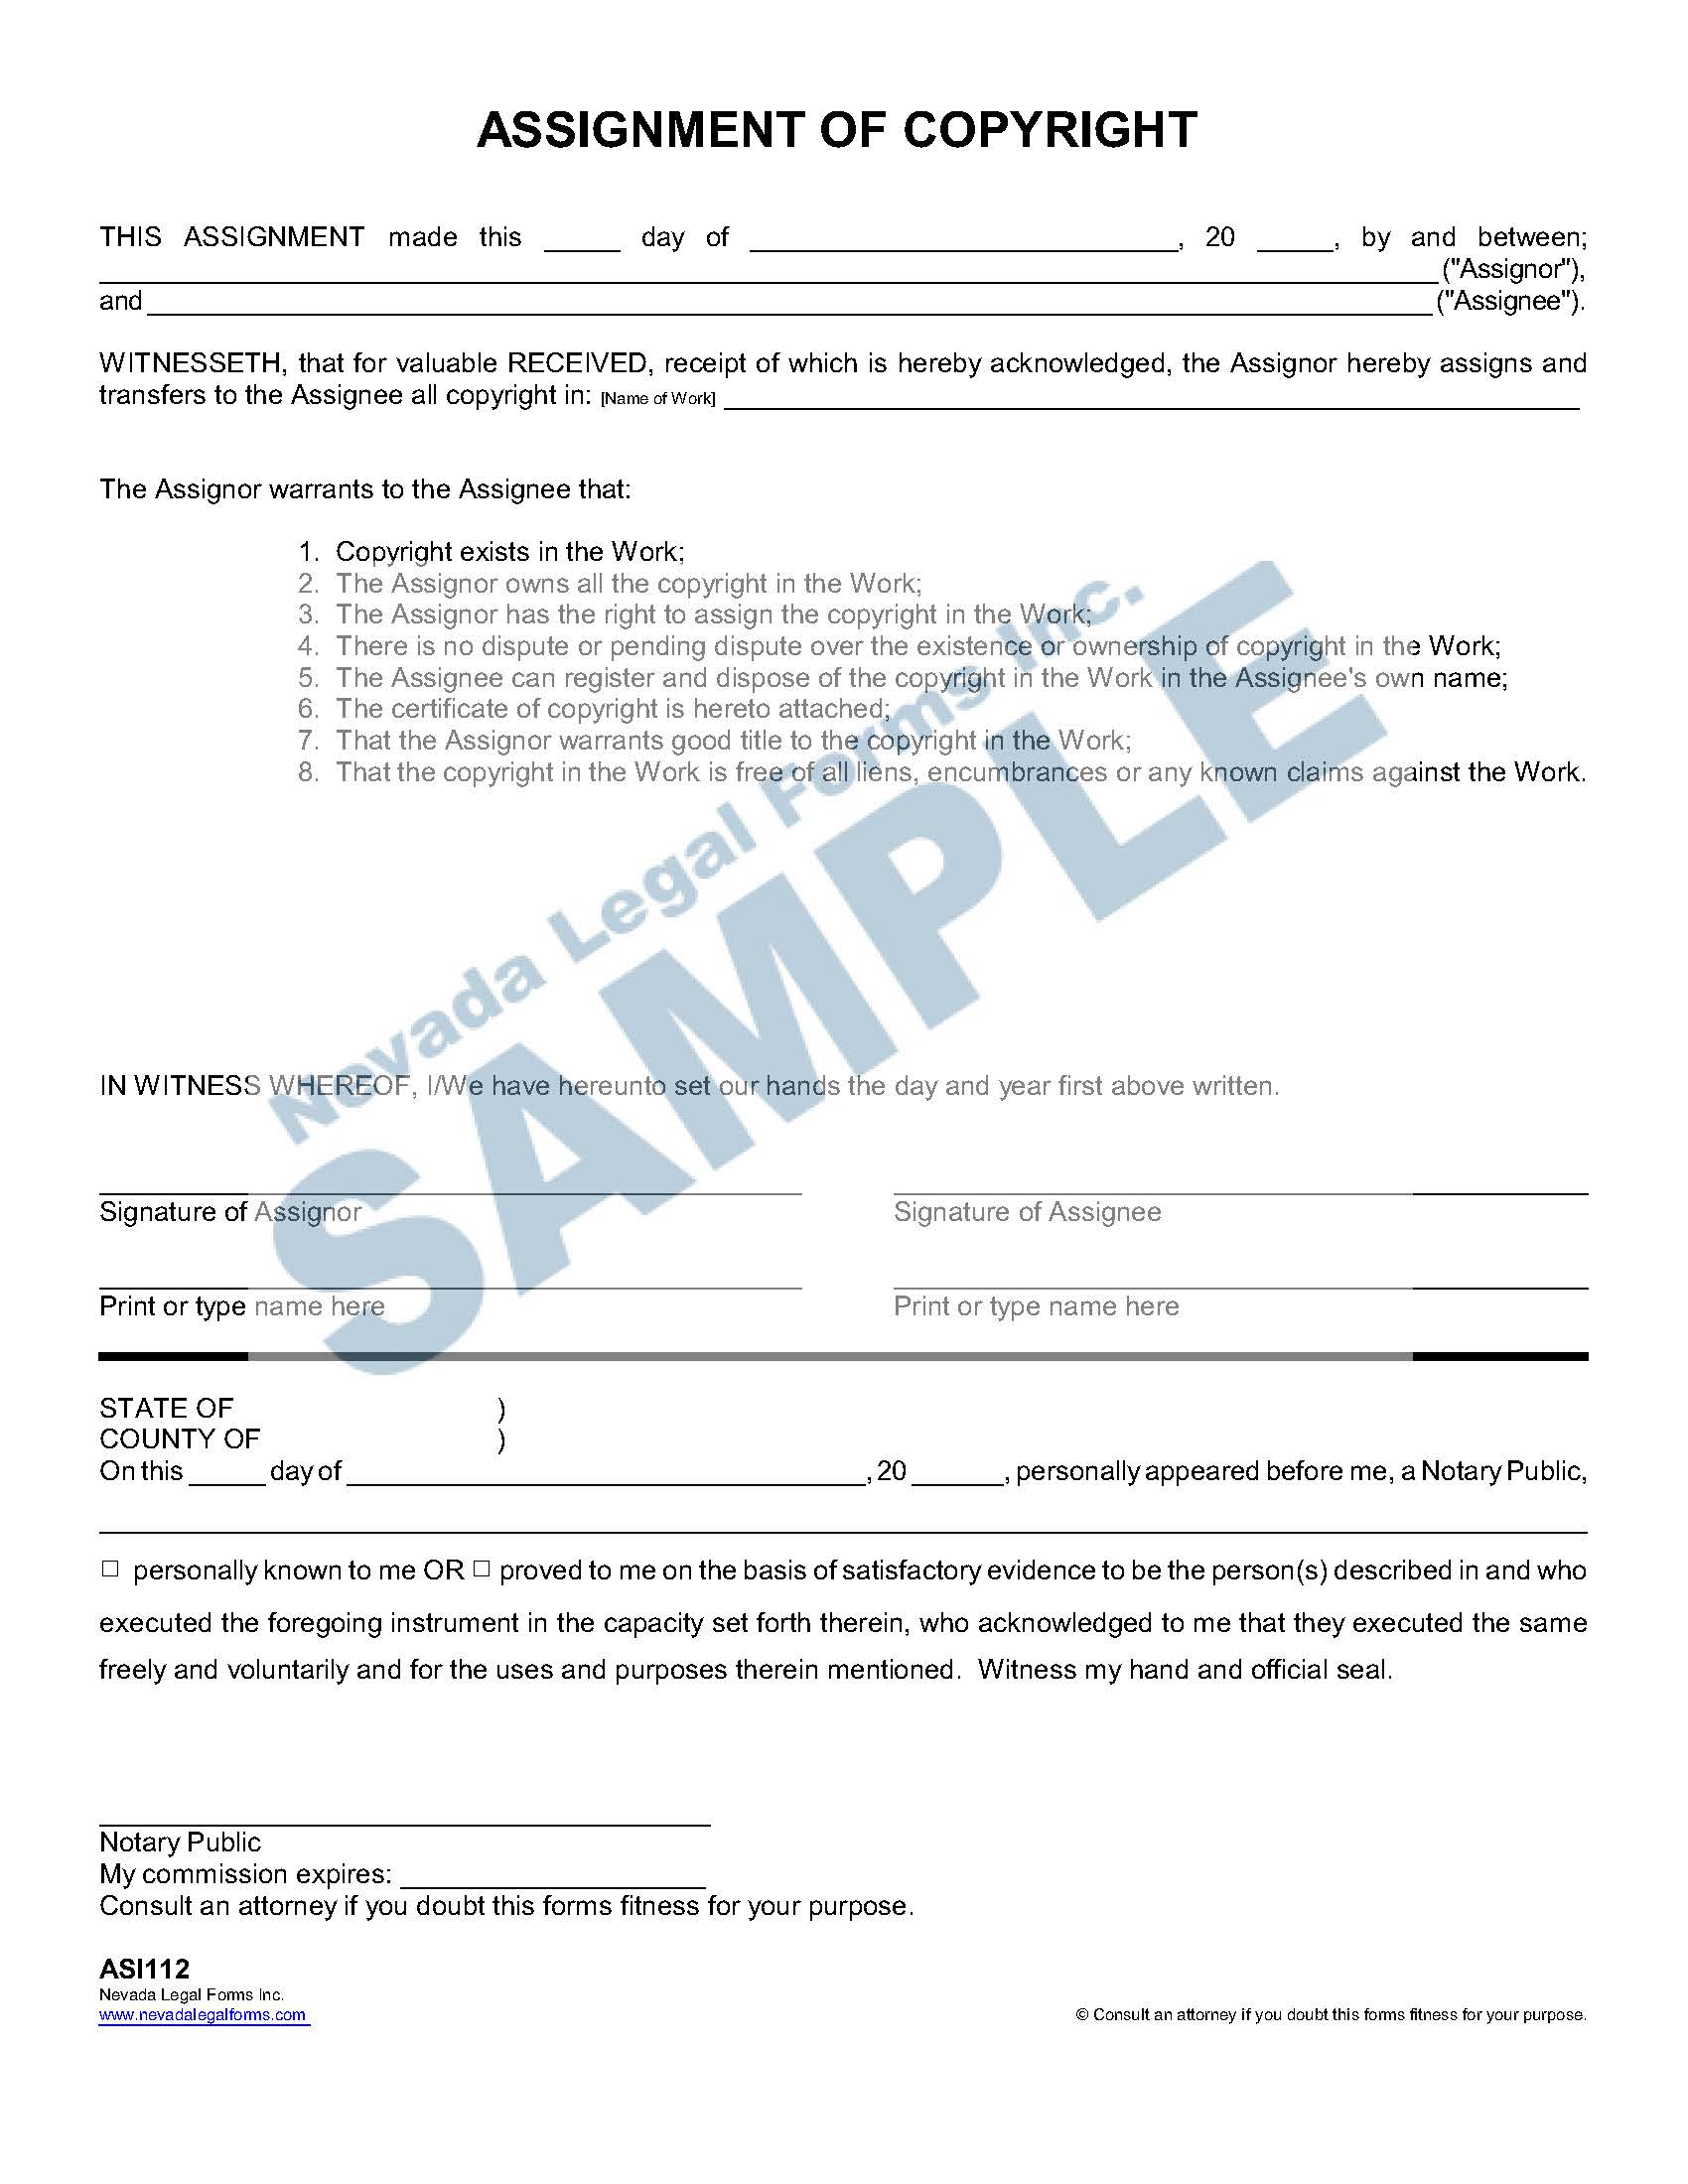 assignment-of-copyright-nevada-legal-forms-services